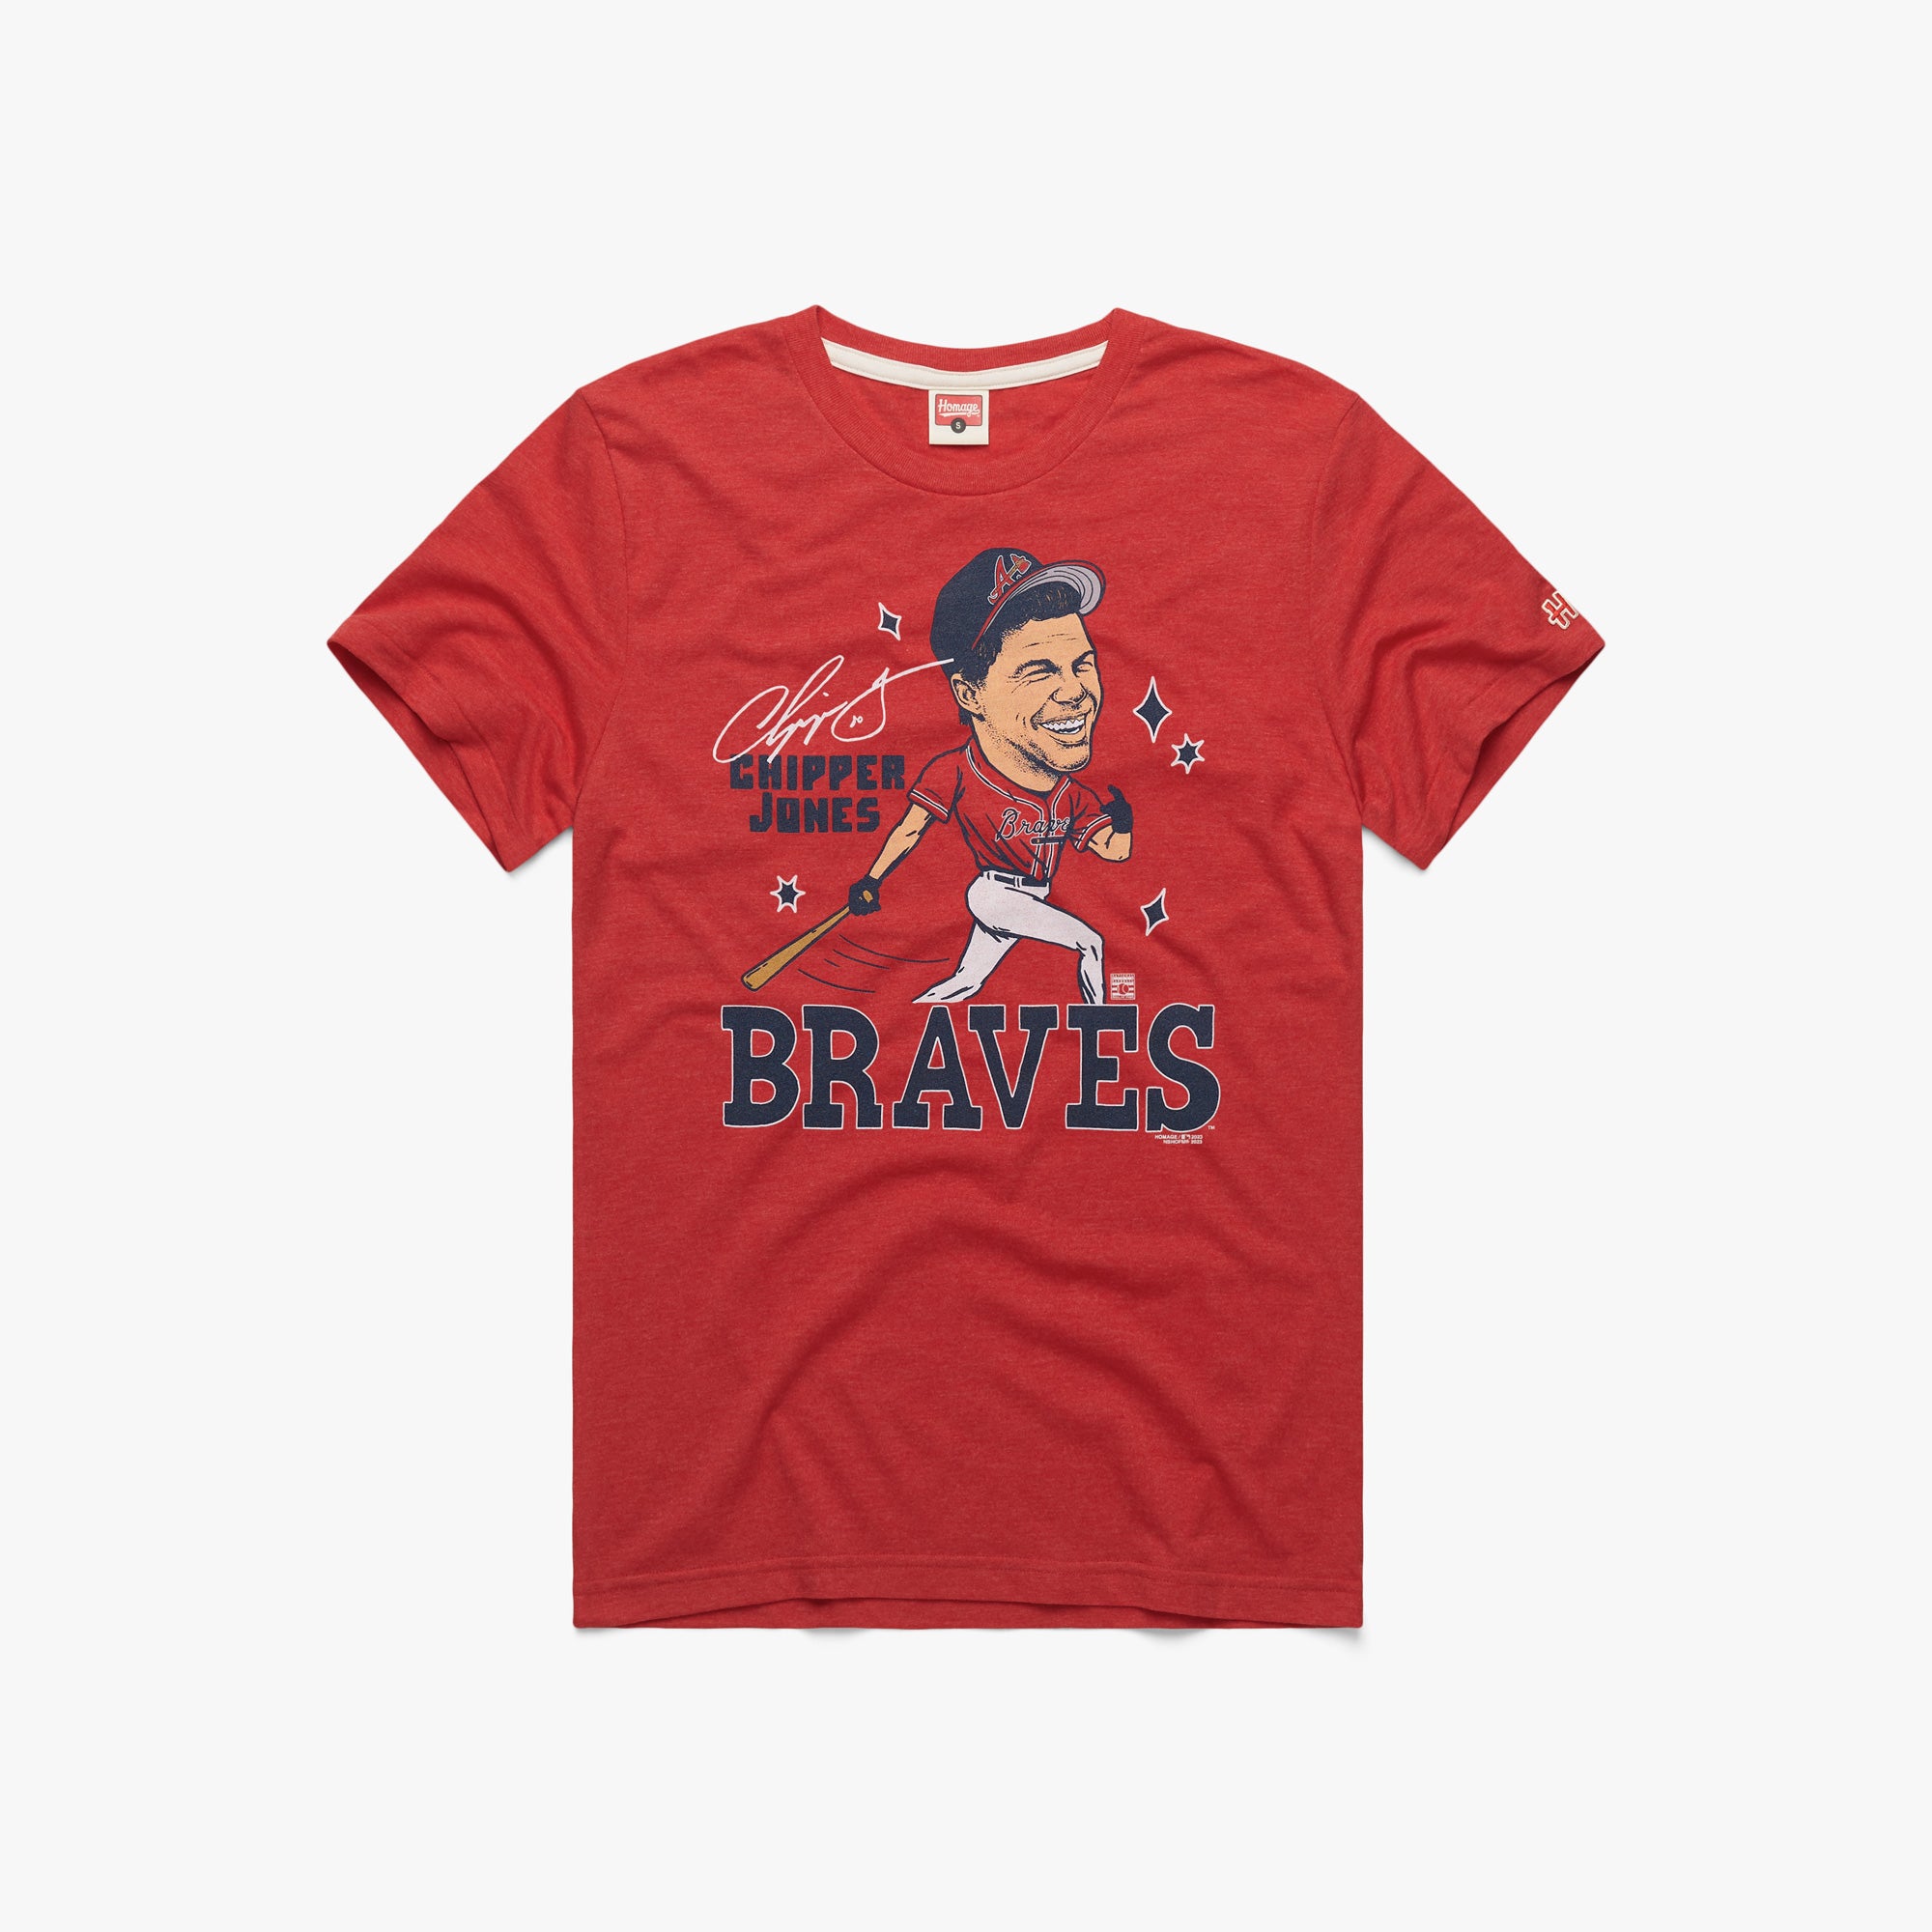 Chipper Jones T-shirt There Will Never Be Another 